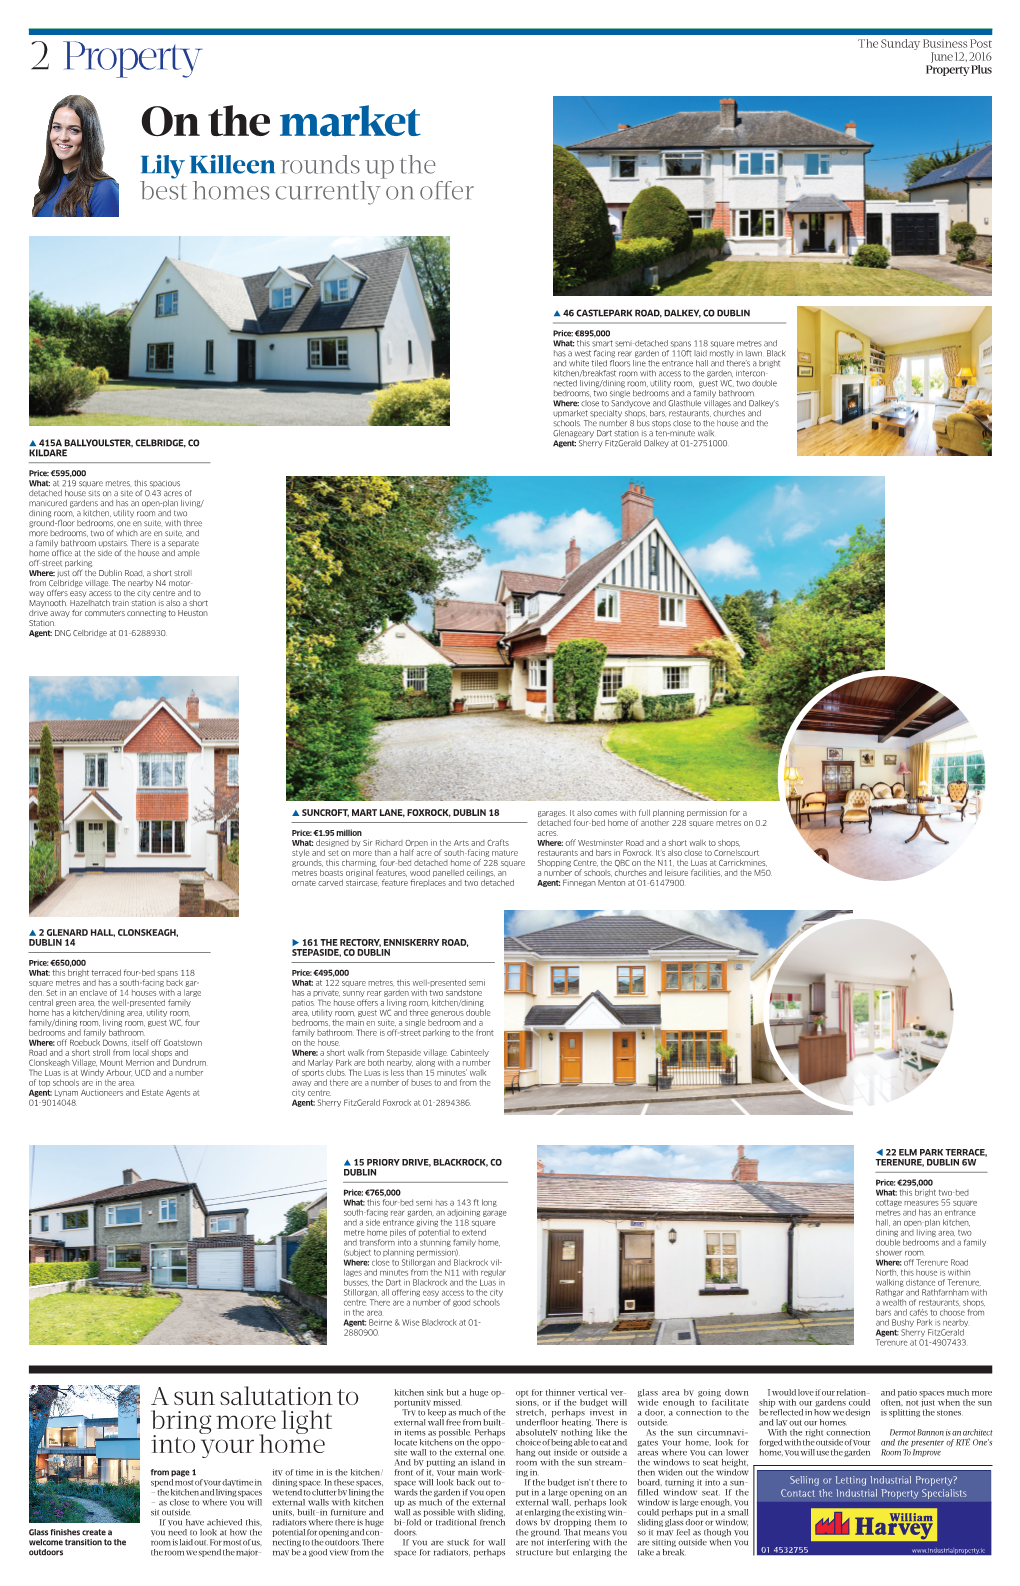 On the Market Lily Killeen Rounds up the Best Homes Currently on Offer